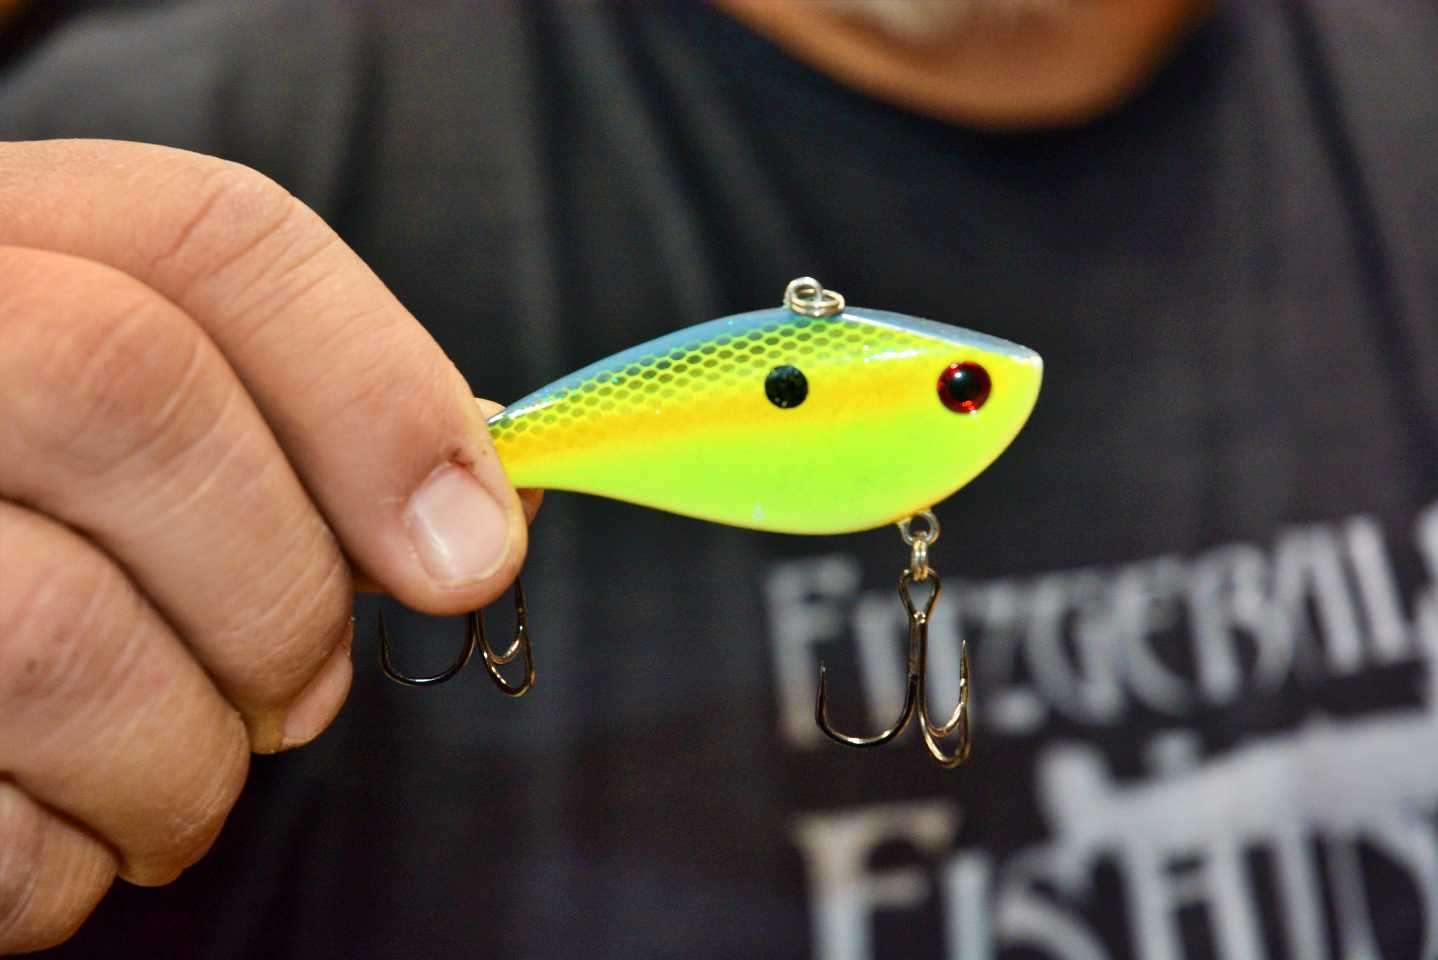 Gross prefers a 1/2-ounce lipless crankbait for greater casting distance. He recommends using a bait filled with rattles for attracting bass from afar.  